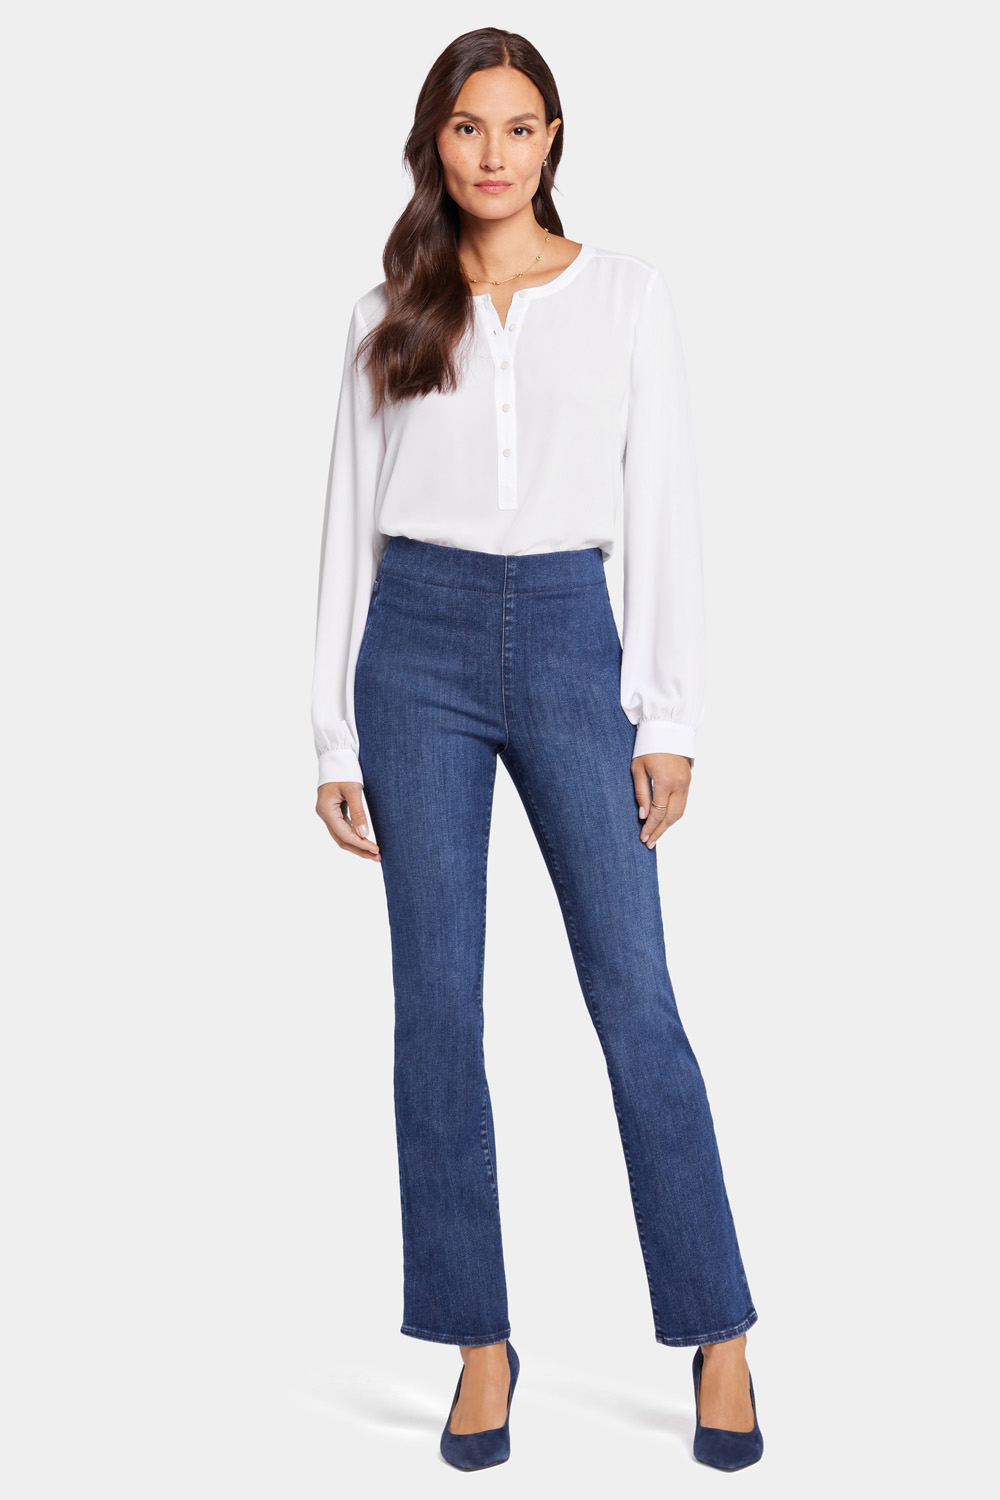 Women's Petite Wide Leg Jeans - Pull-On, Ankle & More